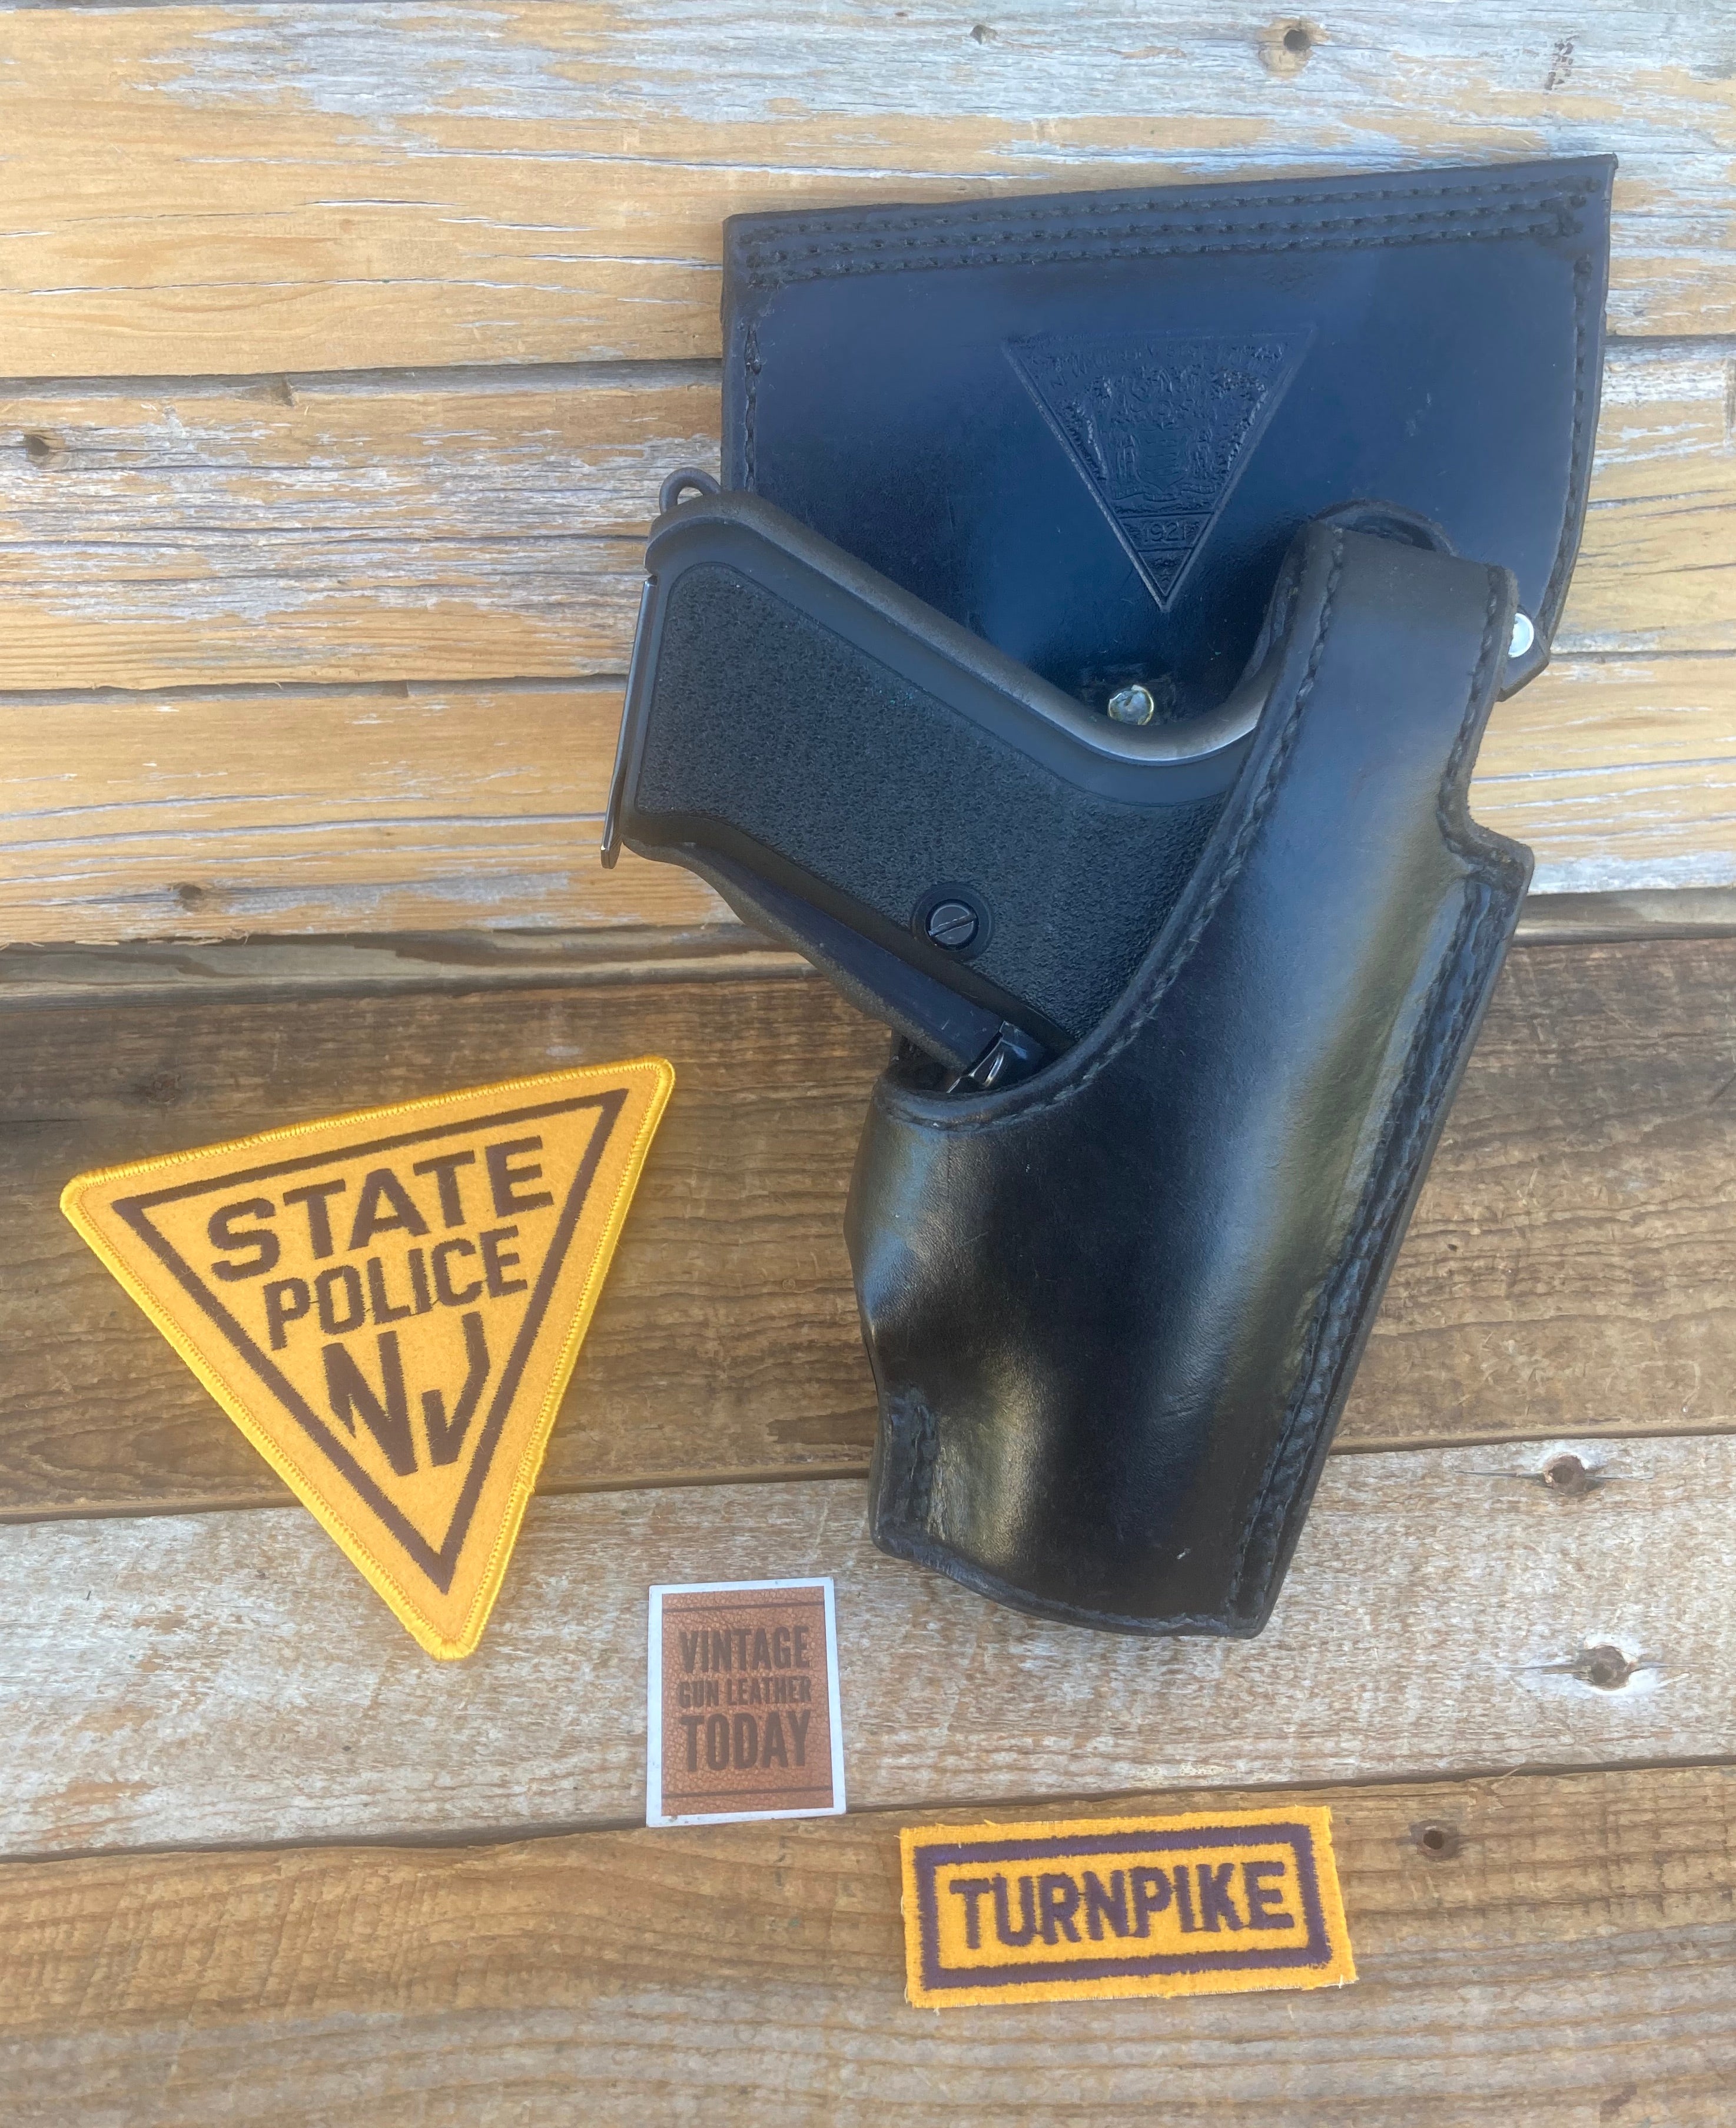 VINTAGE BLACK LEATHER Police Issued Gun Holster For Police Issued